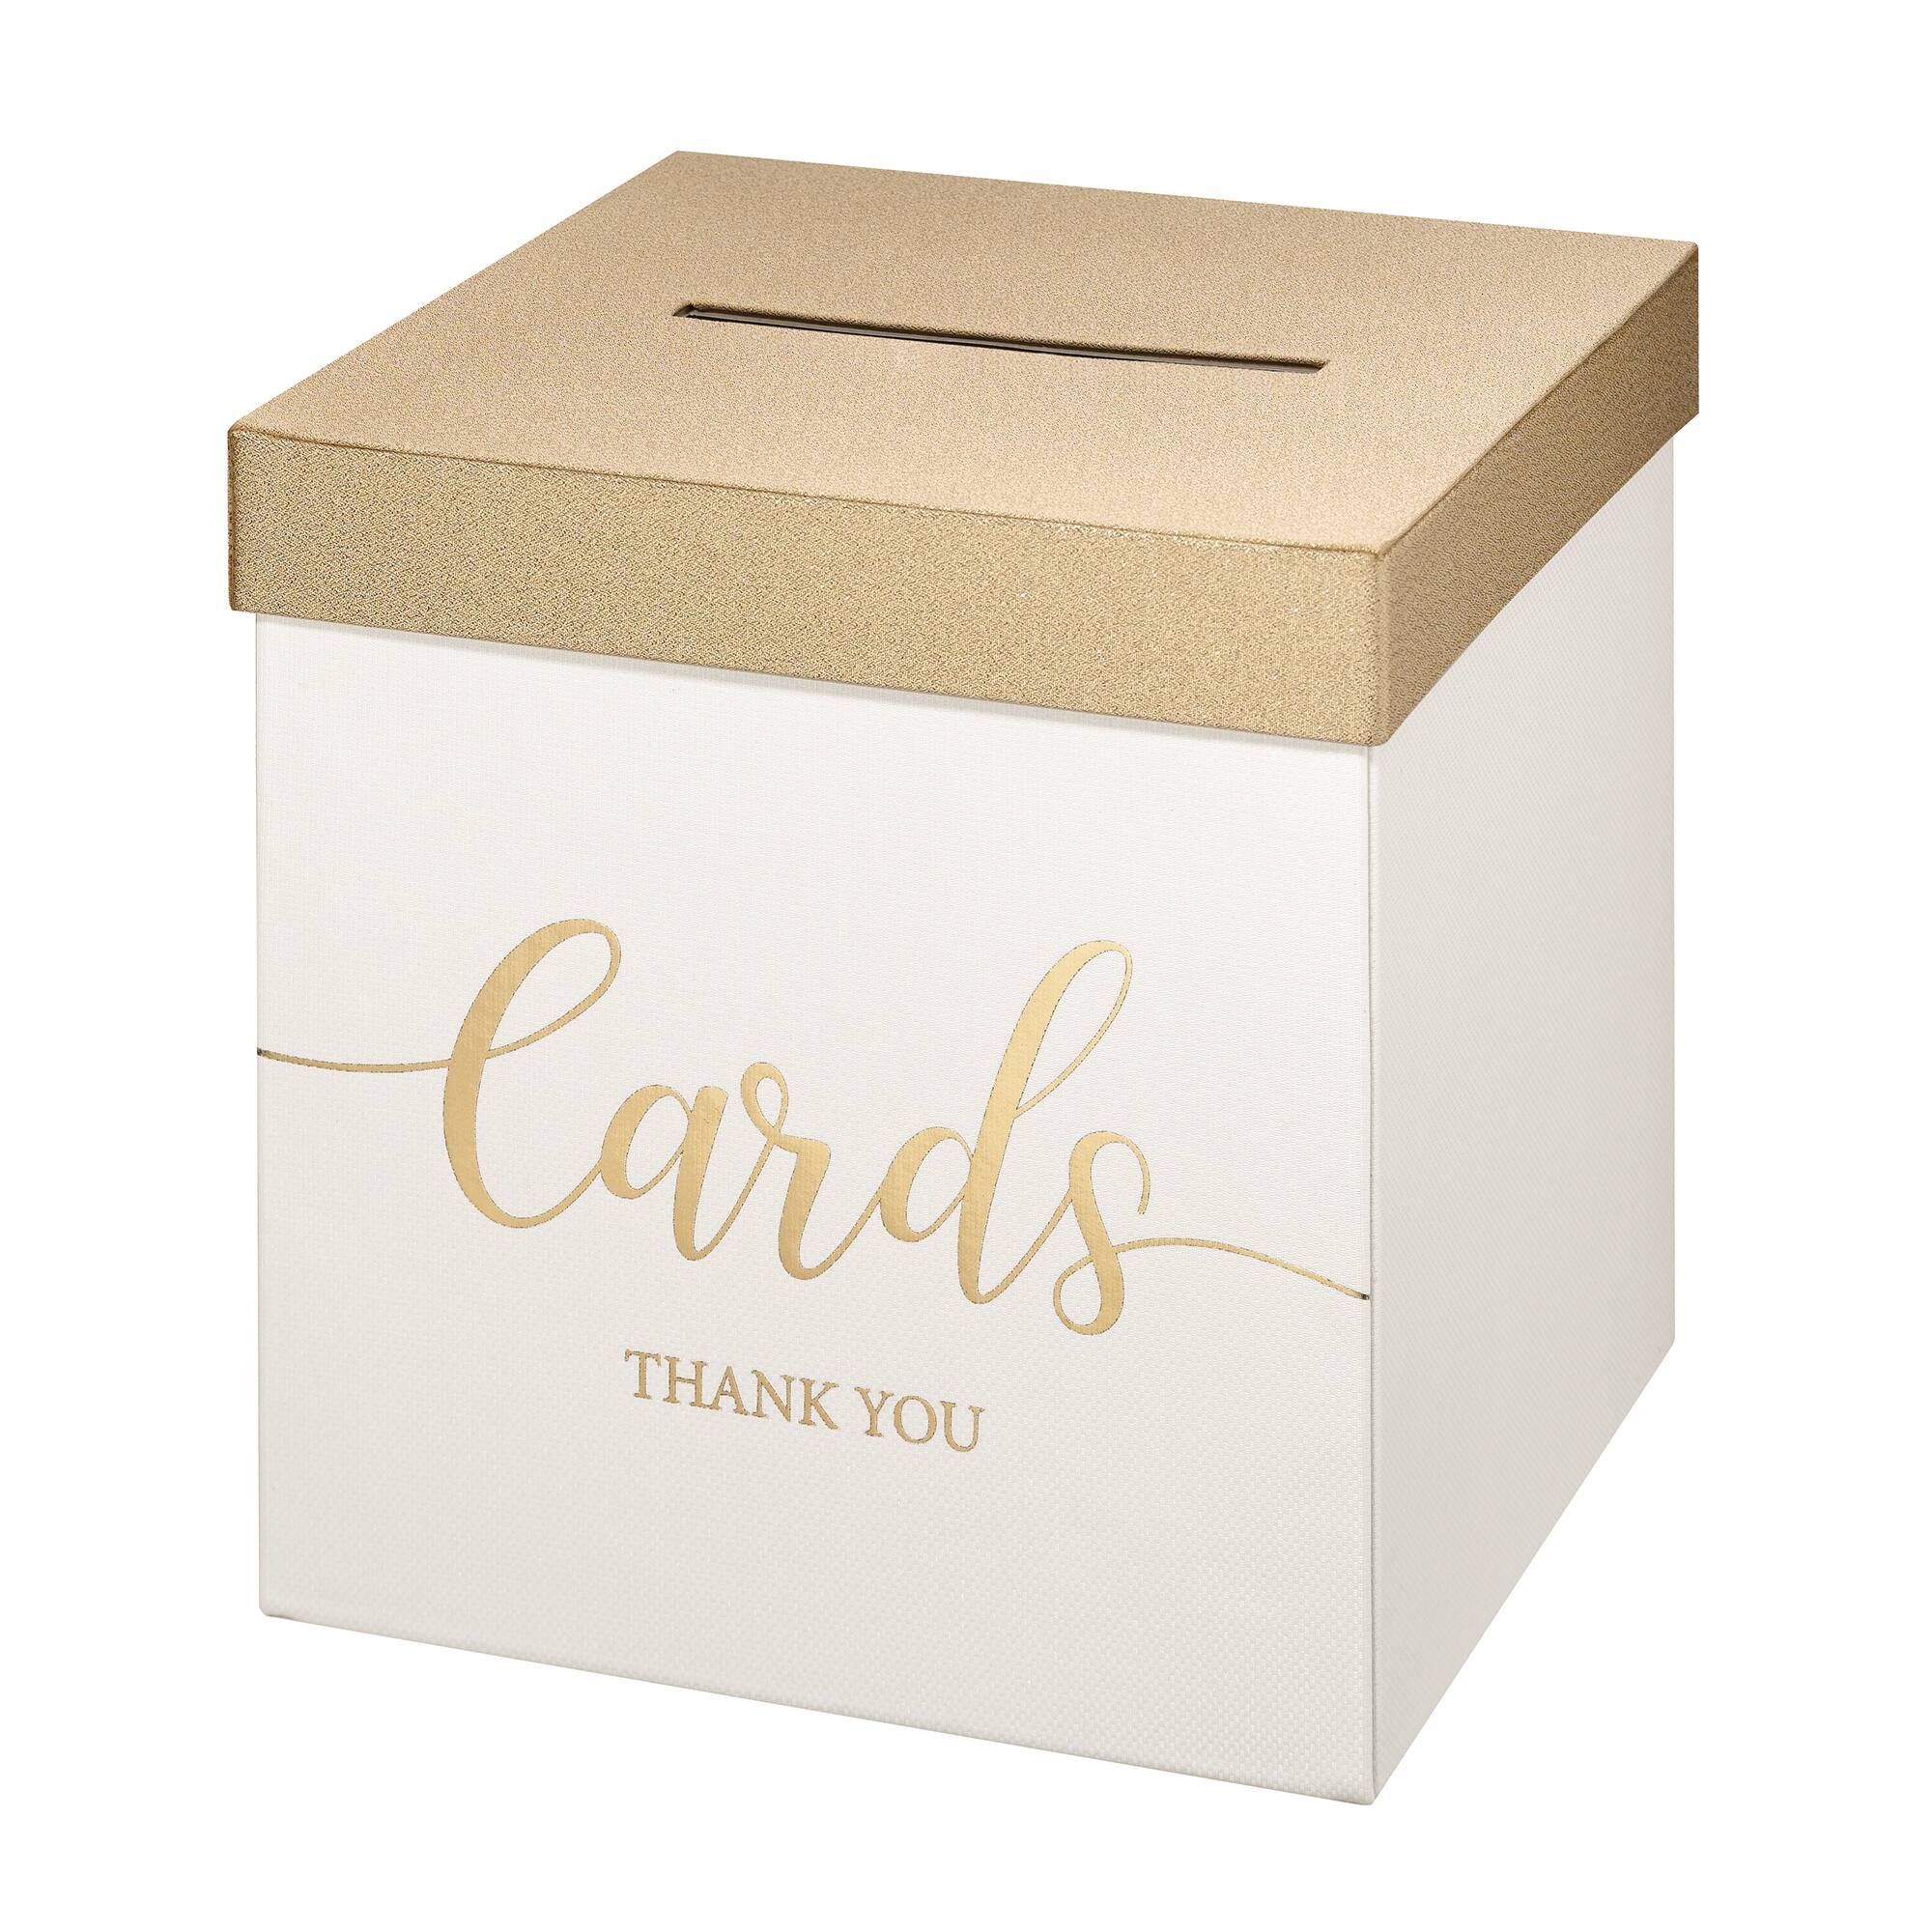 Personalised Wedding Post Card Box Wooden Box Crate Gift Storage Wedding Party 